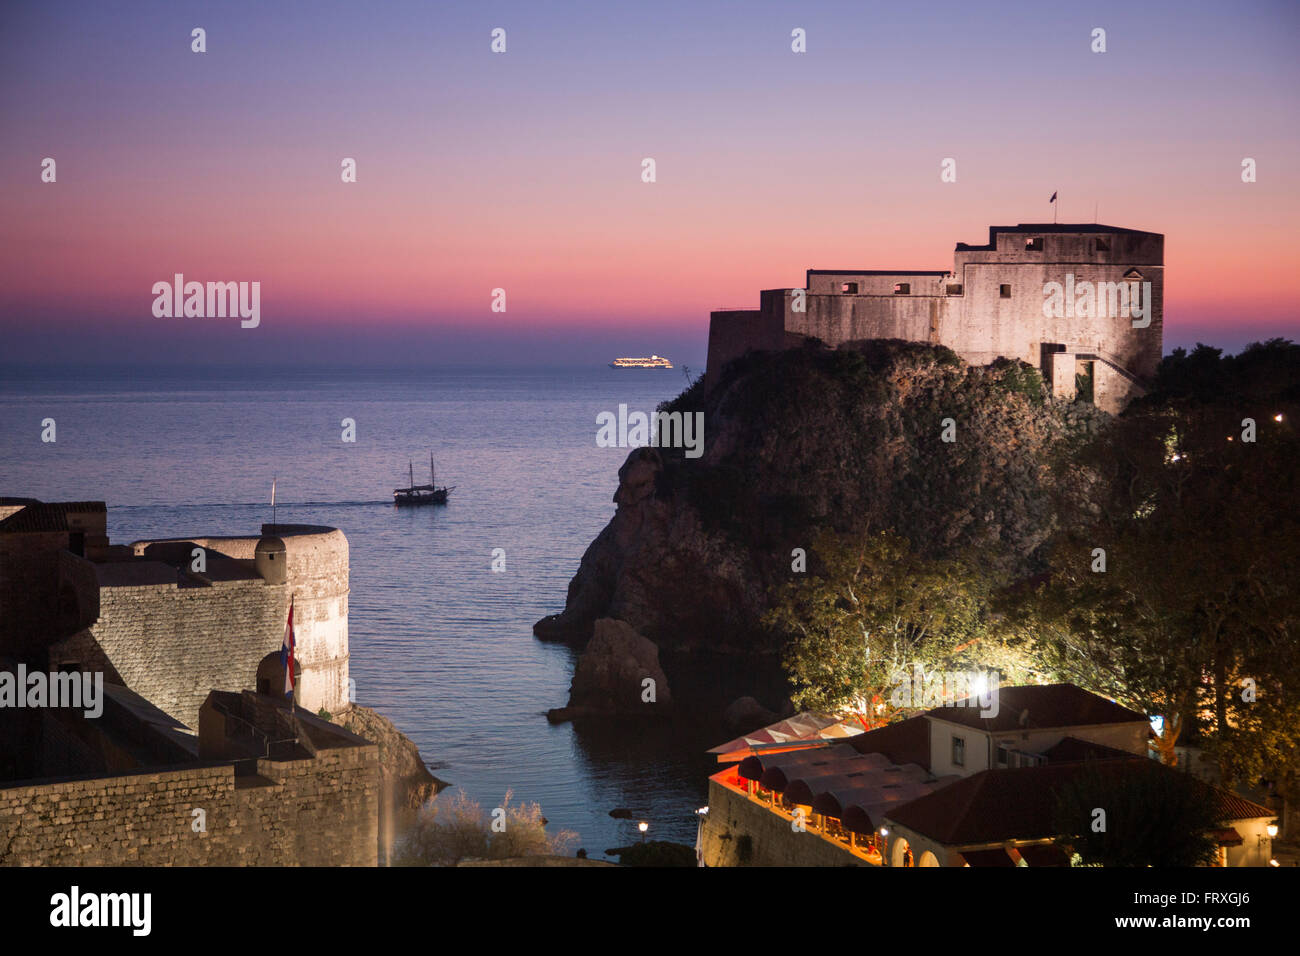 Old town fortification seen from the city wall at dusk with excursion boat and cruise ship in the distance, Dubrovnik, Dubrovnik-Neretva, Croatia Stock Photo